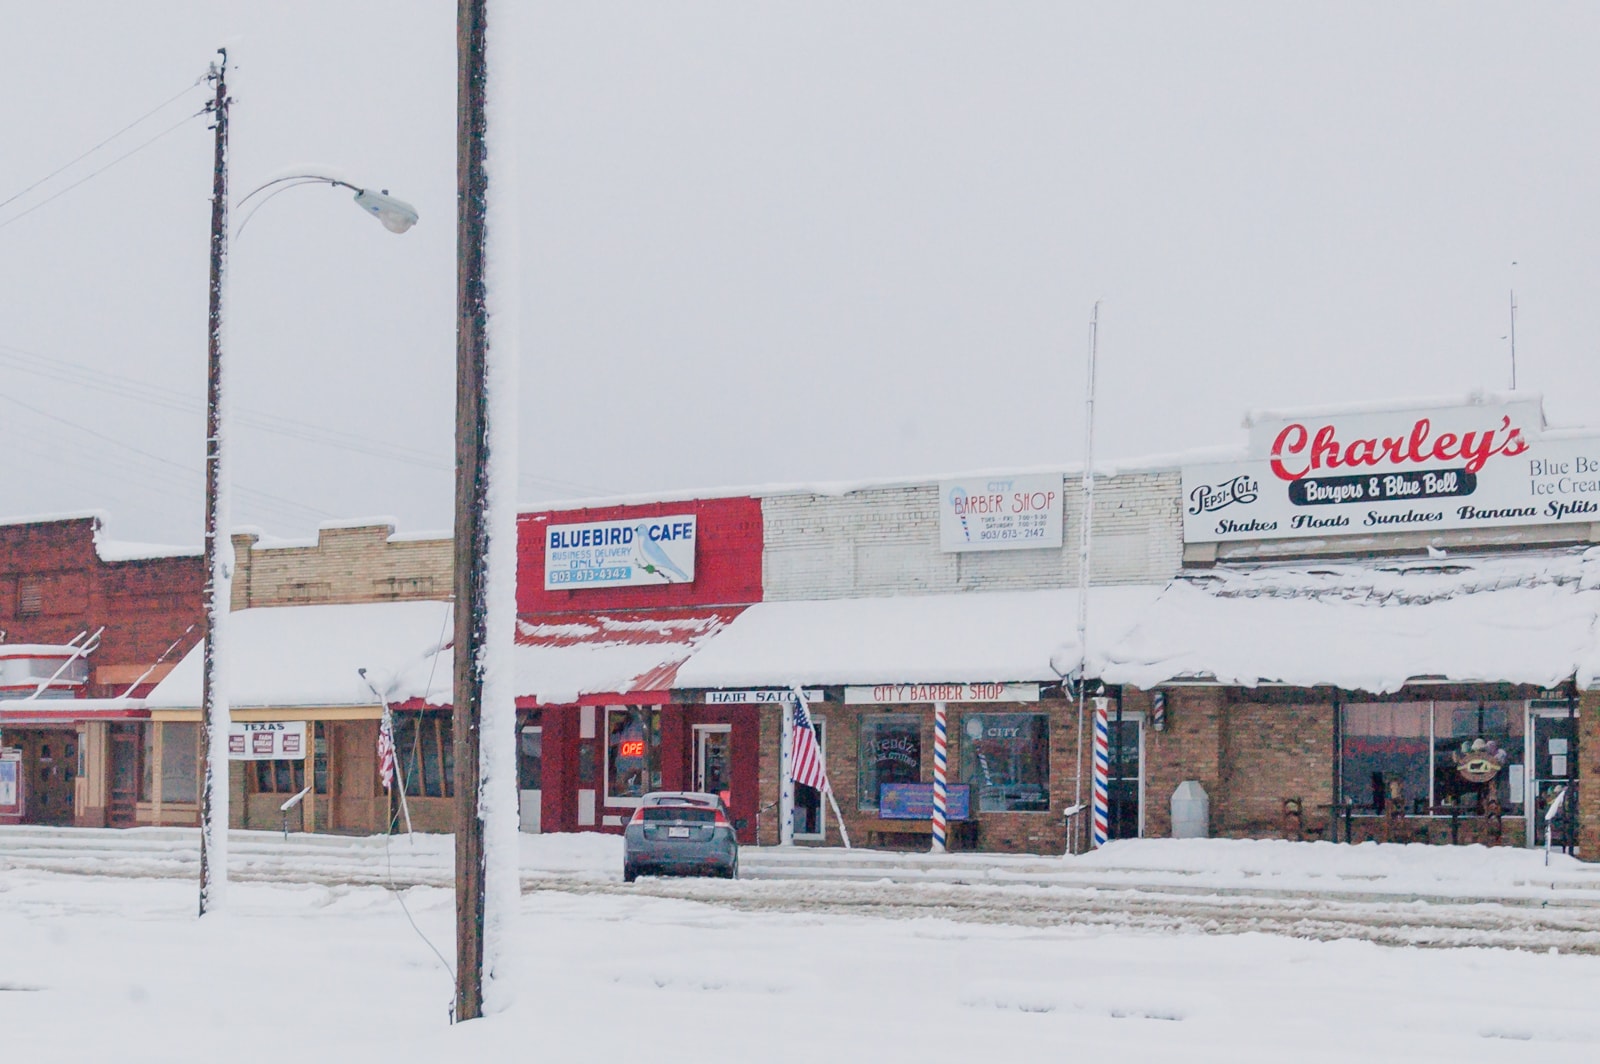 Stores in the 2010 East Texas snowstorm